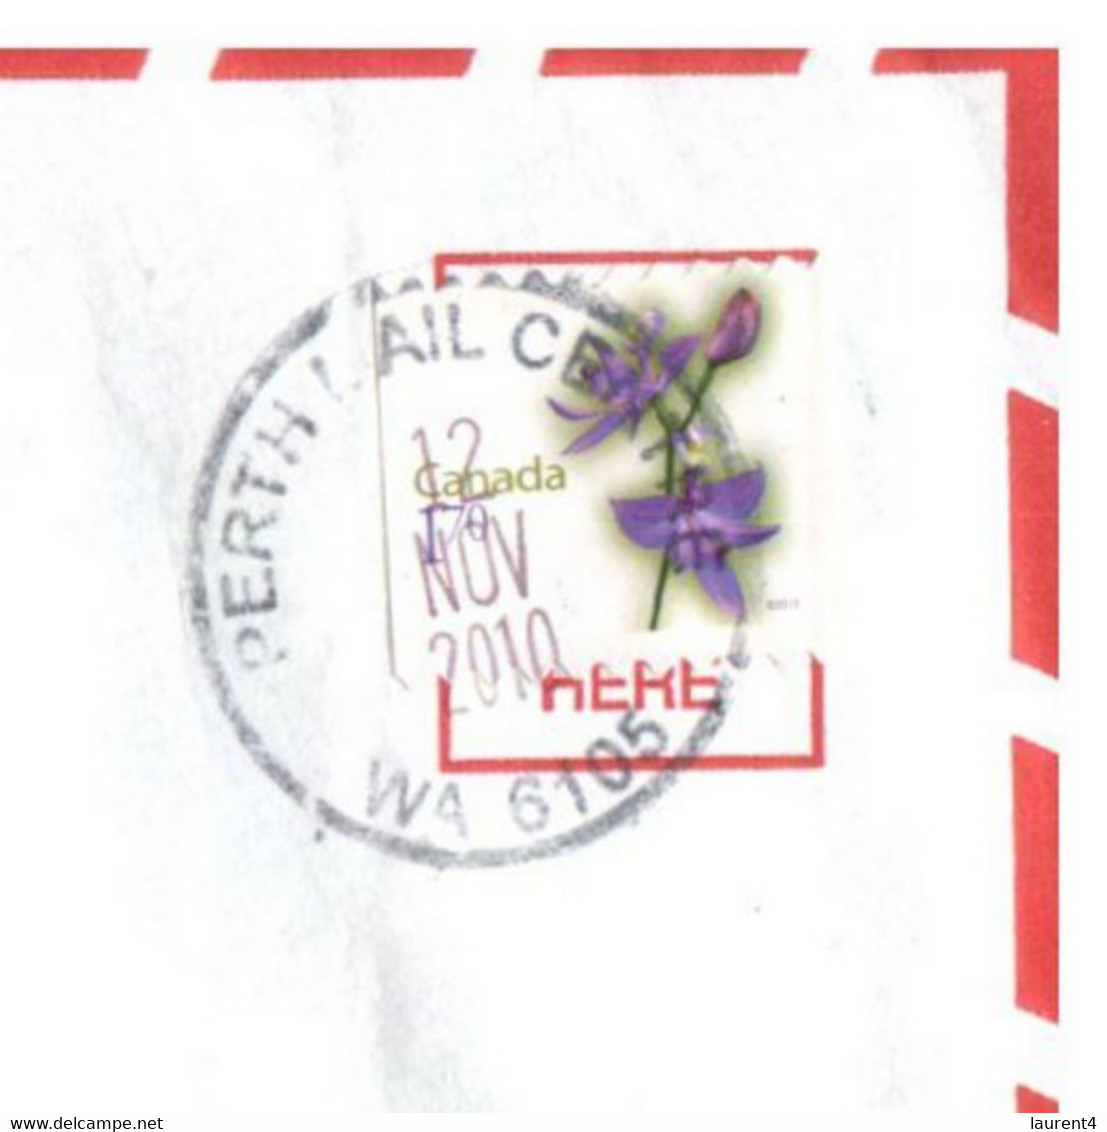 (SS 34) Australia - Letter Posted With "Illegal" Canadian Postage Stamp (still Went Through The Mail In 2014) - Variétés Et Curiosités